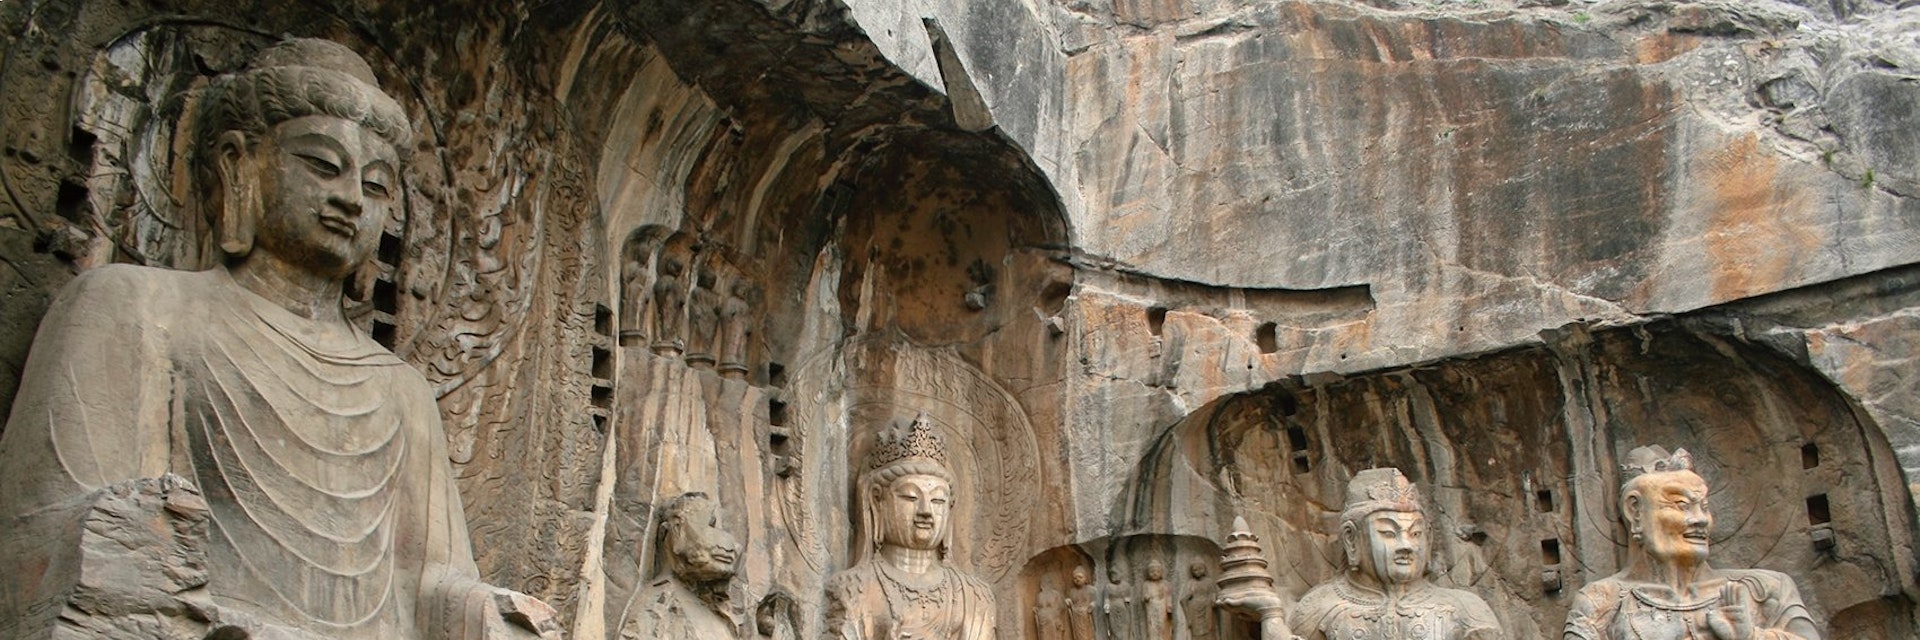 Luoyang, China - June 19, 2008: Tourists take photos in front of the massive stone carvings of Buddha at the Longmen Grottoes.